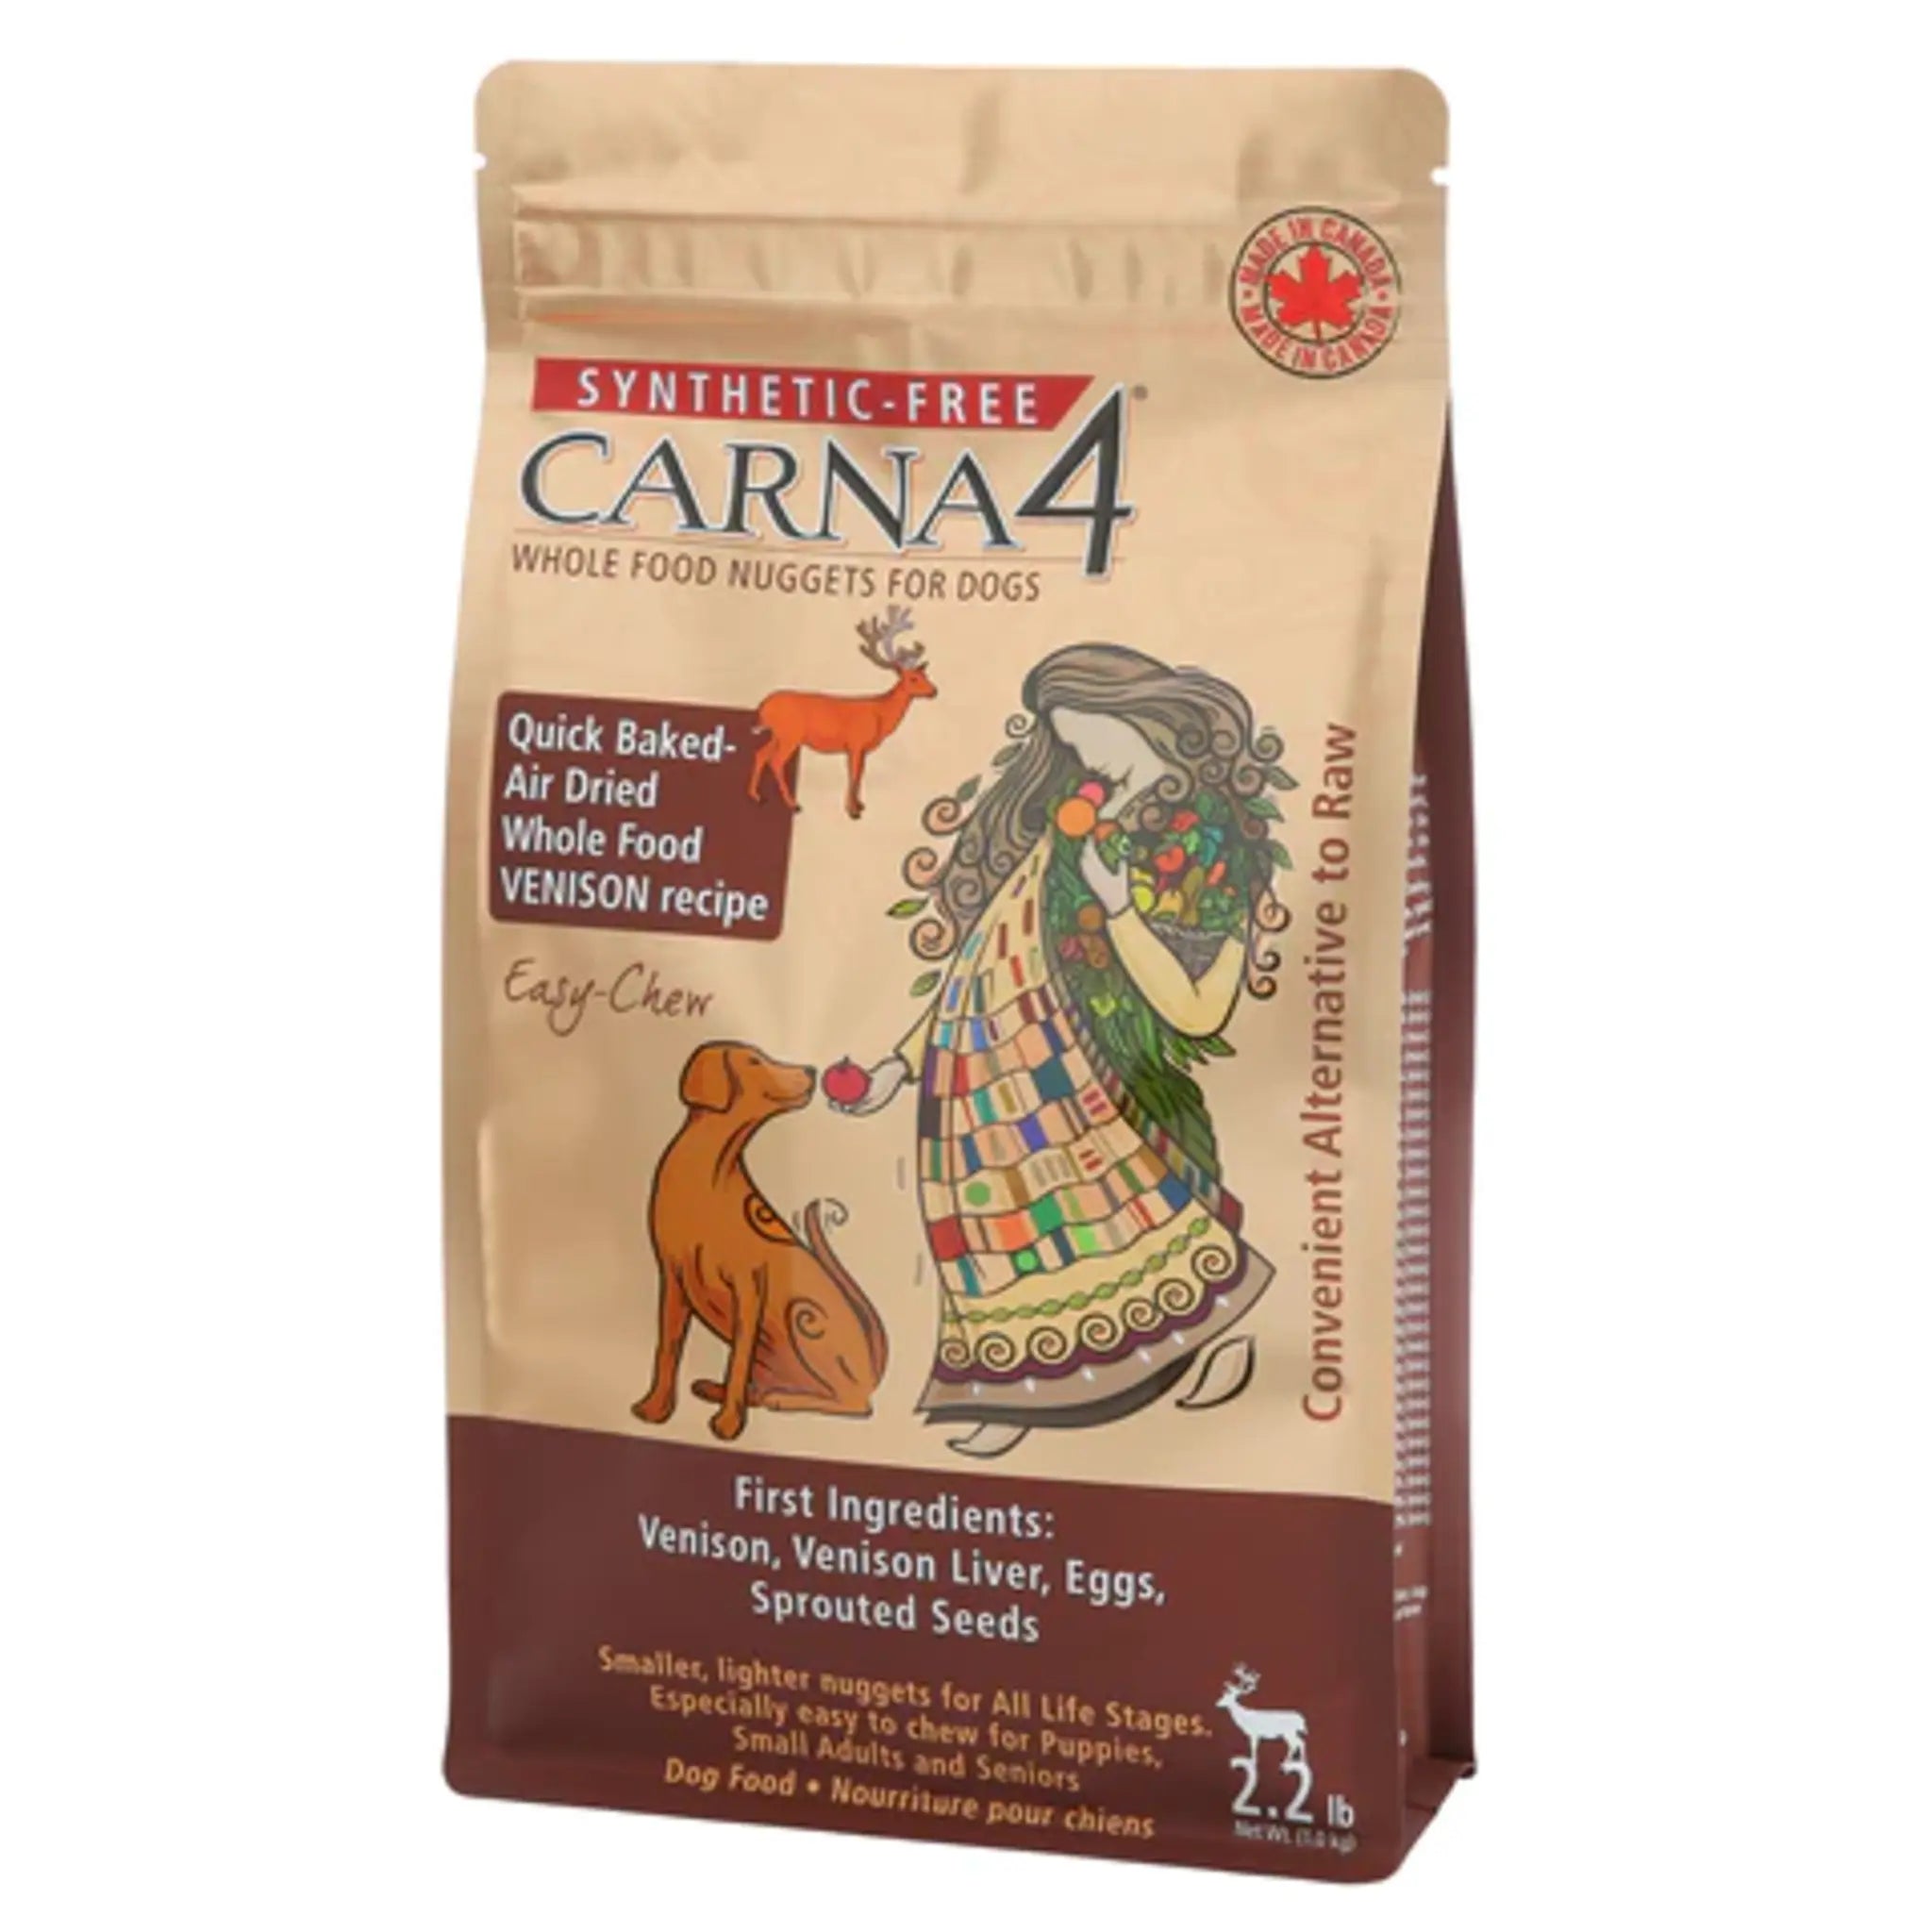 A bag of Carna4 Whole Food Nuggets Dog Food, Easy-Chew Venison Recipe, Synthetic-Free, Made in Canada, 2.2 lb